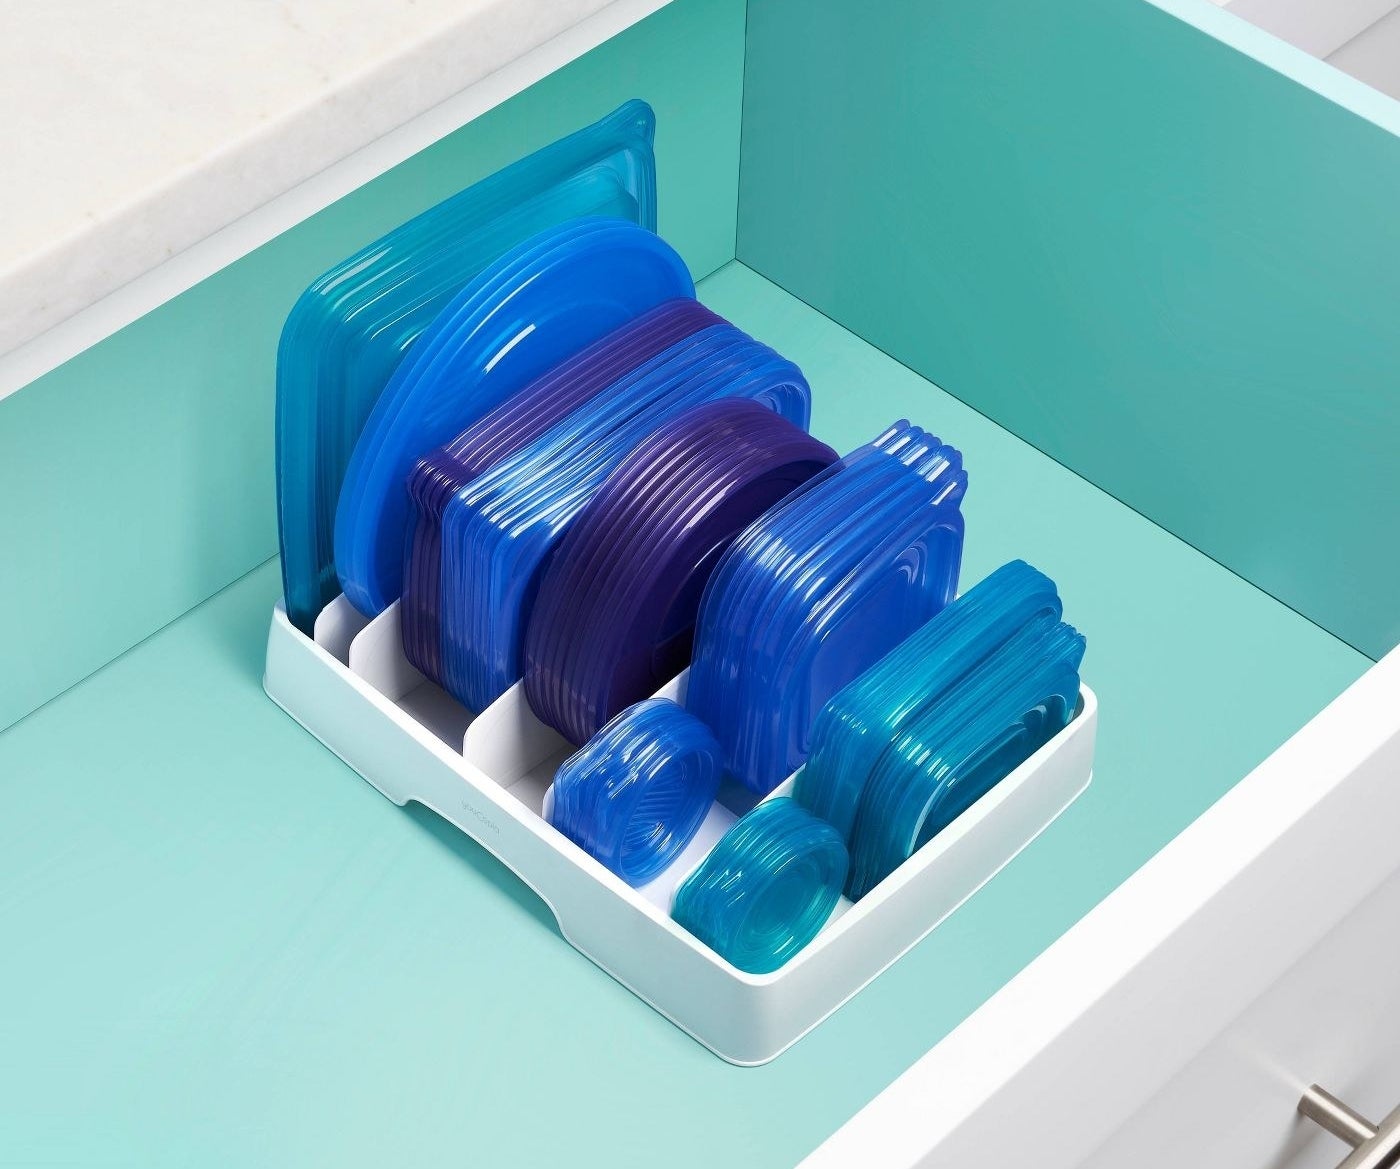 White lid organizer with neatly stacked blue plastic lids in a drawer